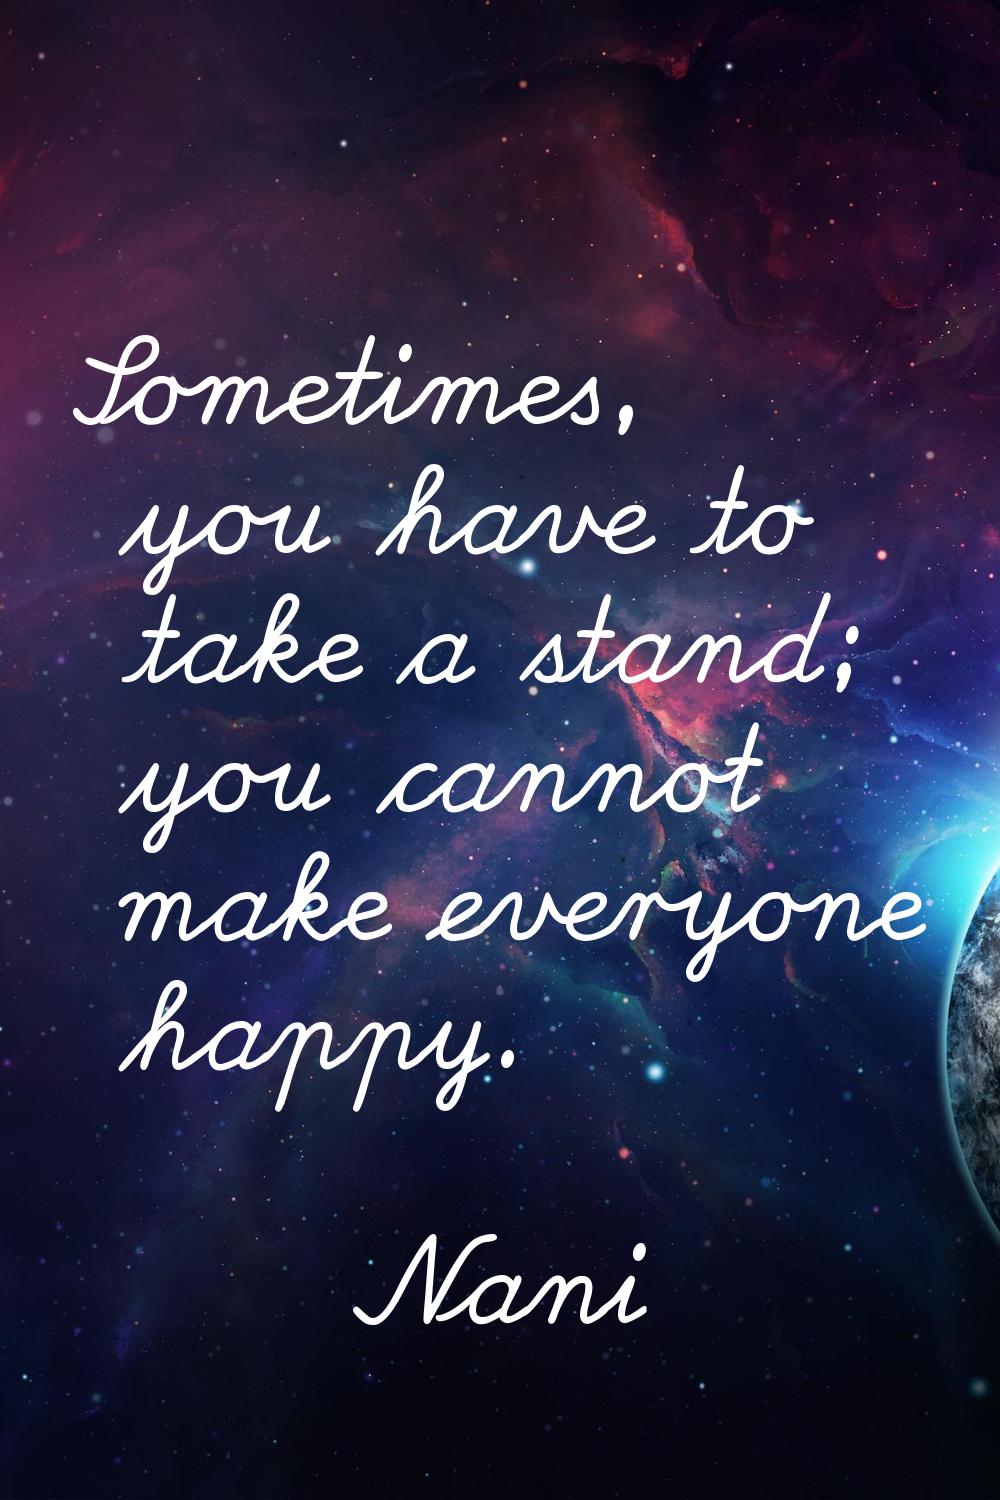 Sometimes, you have to take a stand; you cannot make everyone happy.